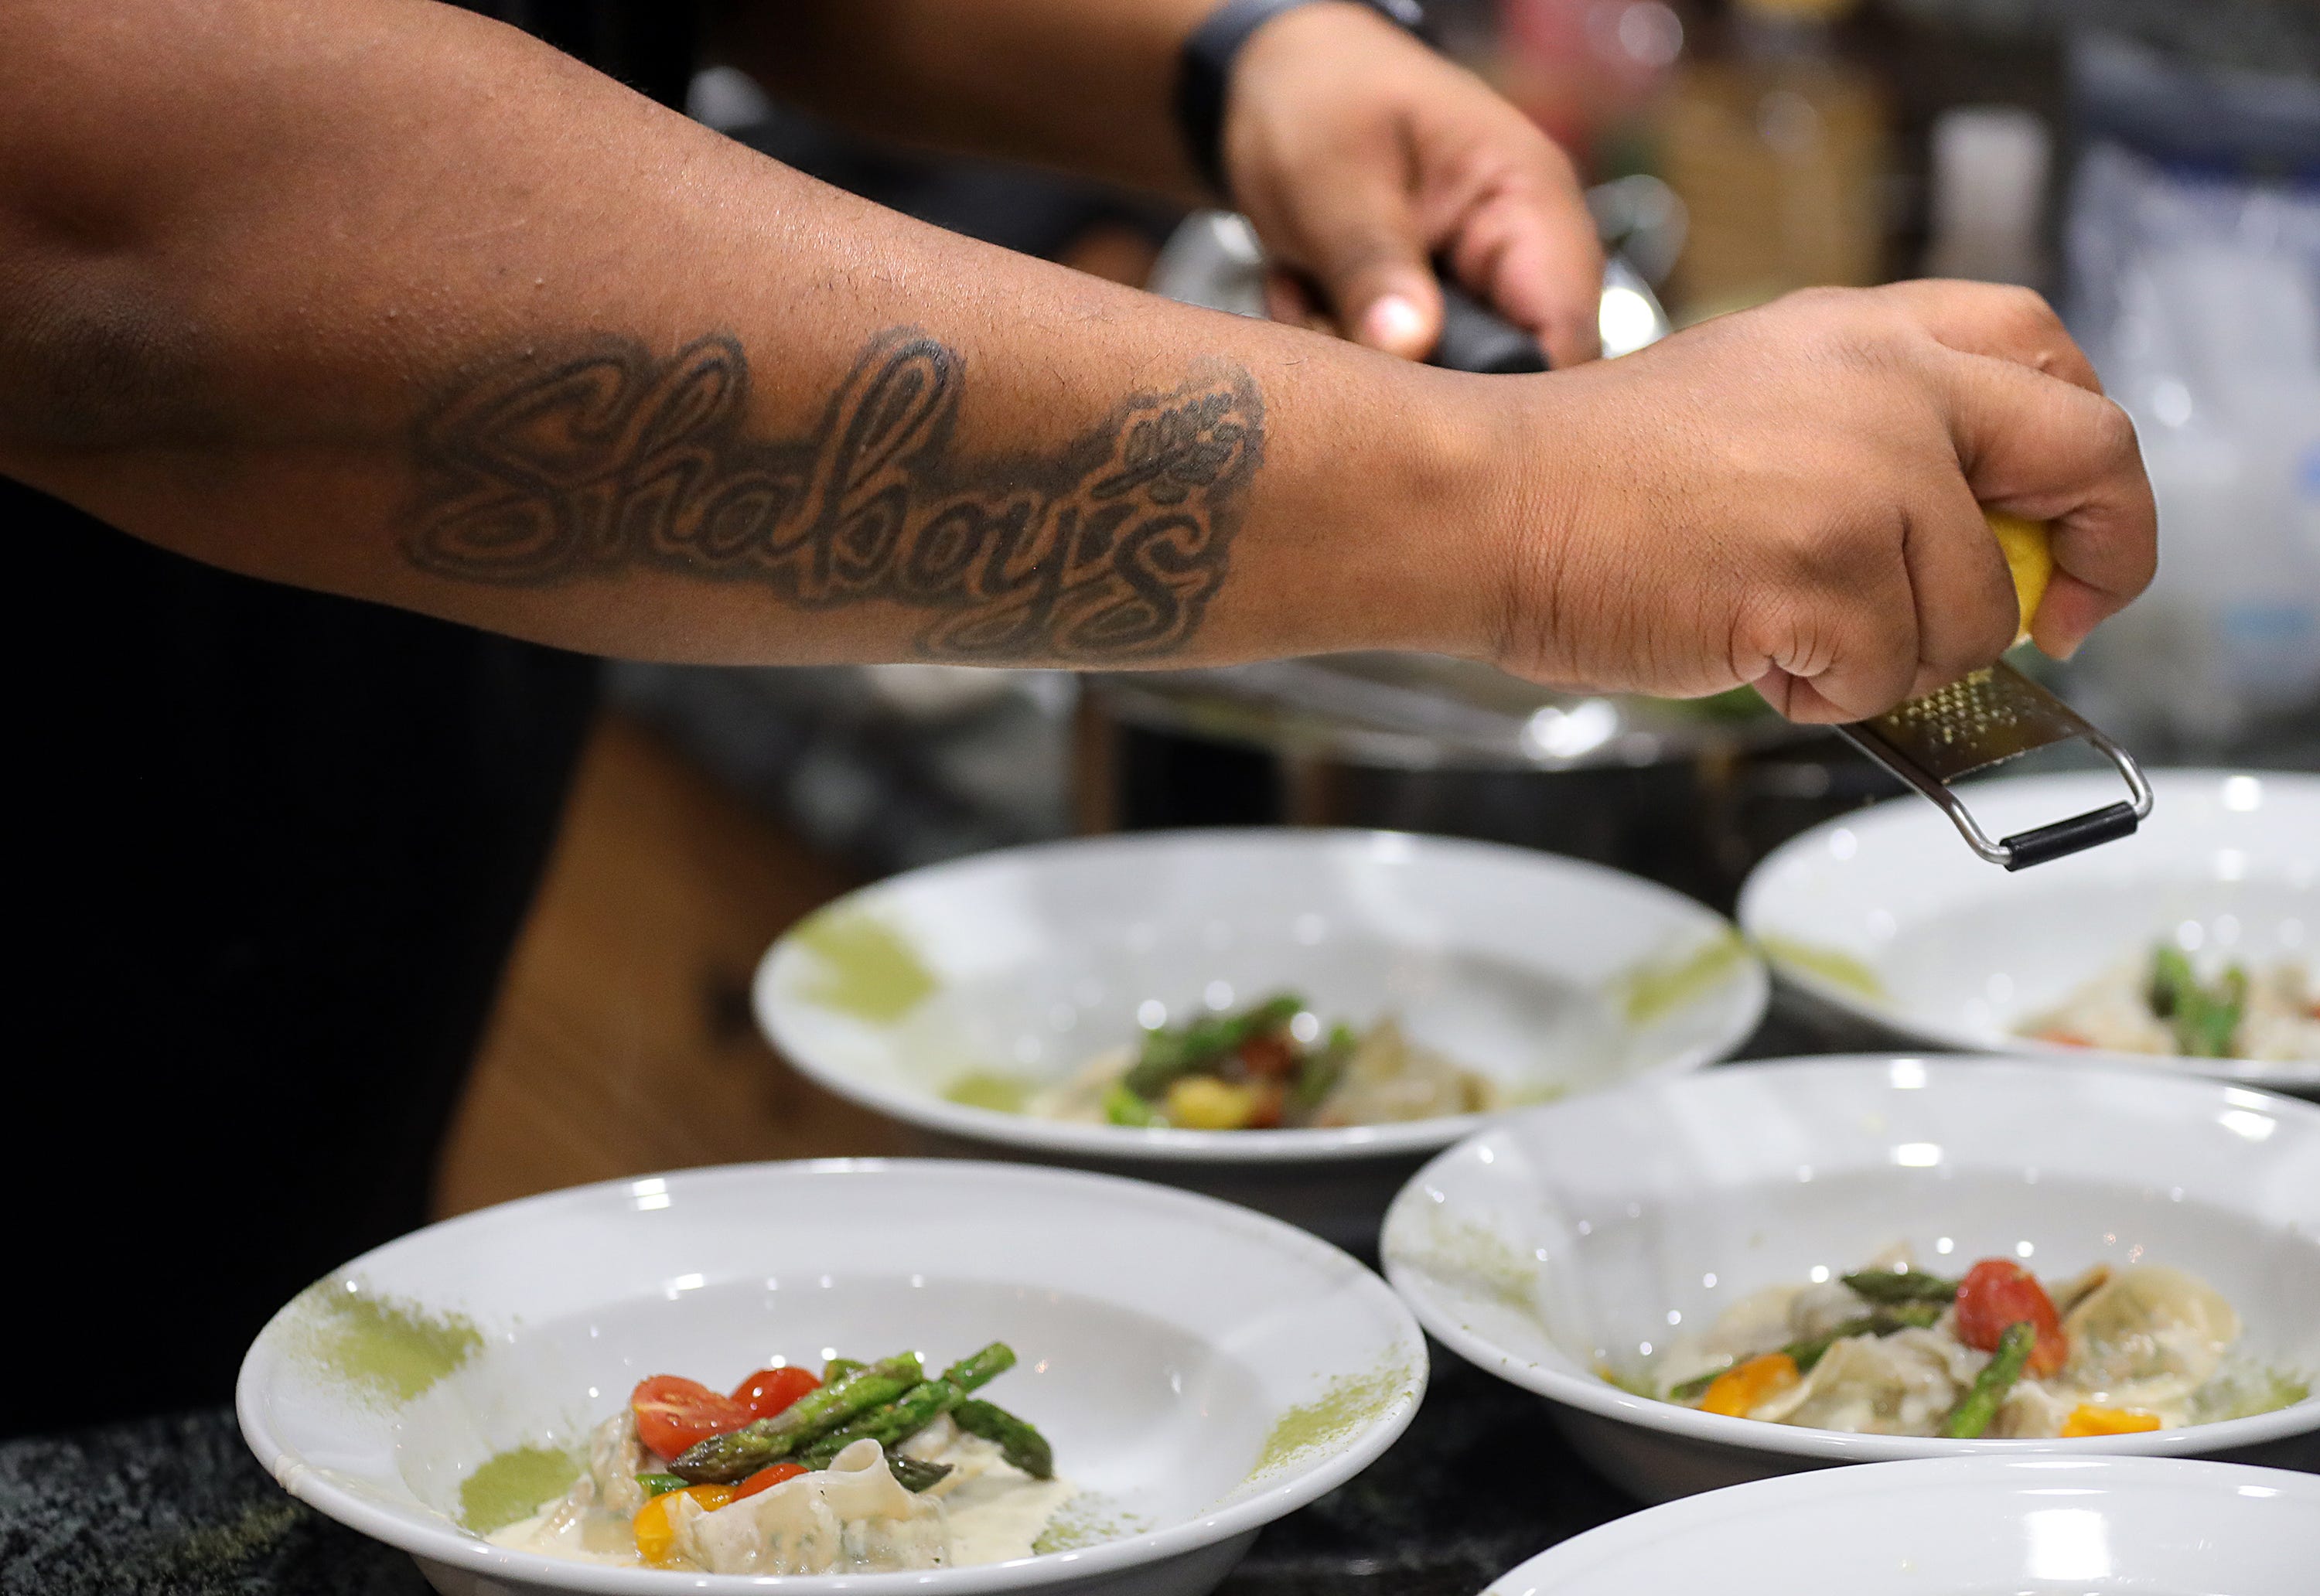 Chef Dion Millender wears his passion on his arm in the form of a tattoo of his company's logo.